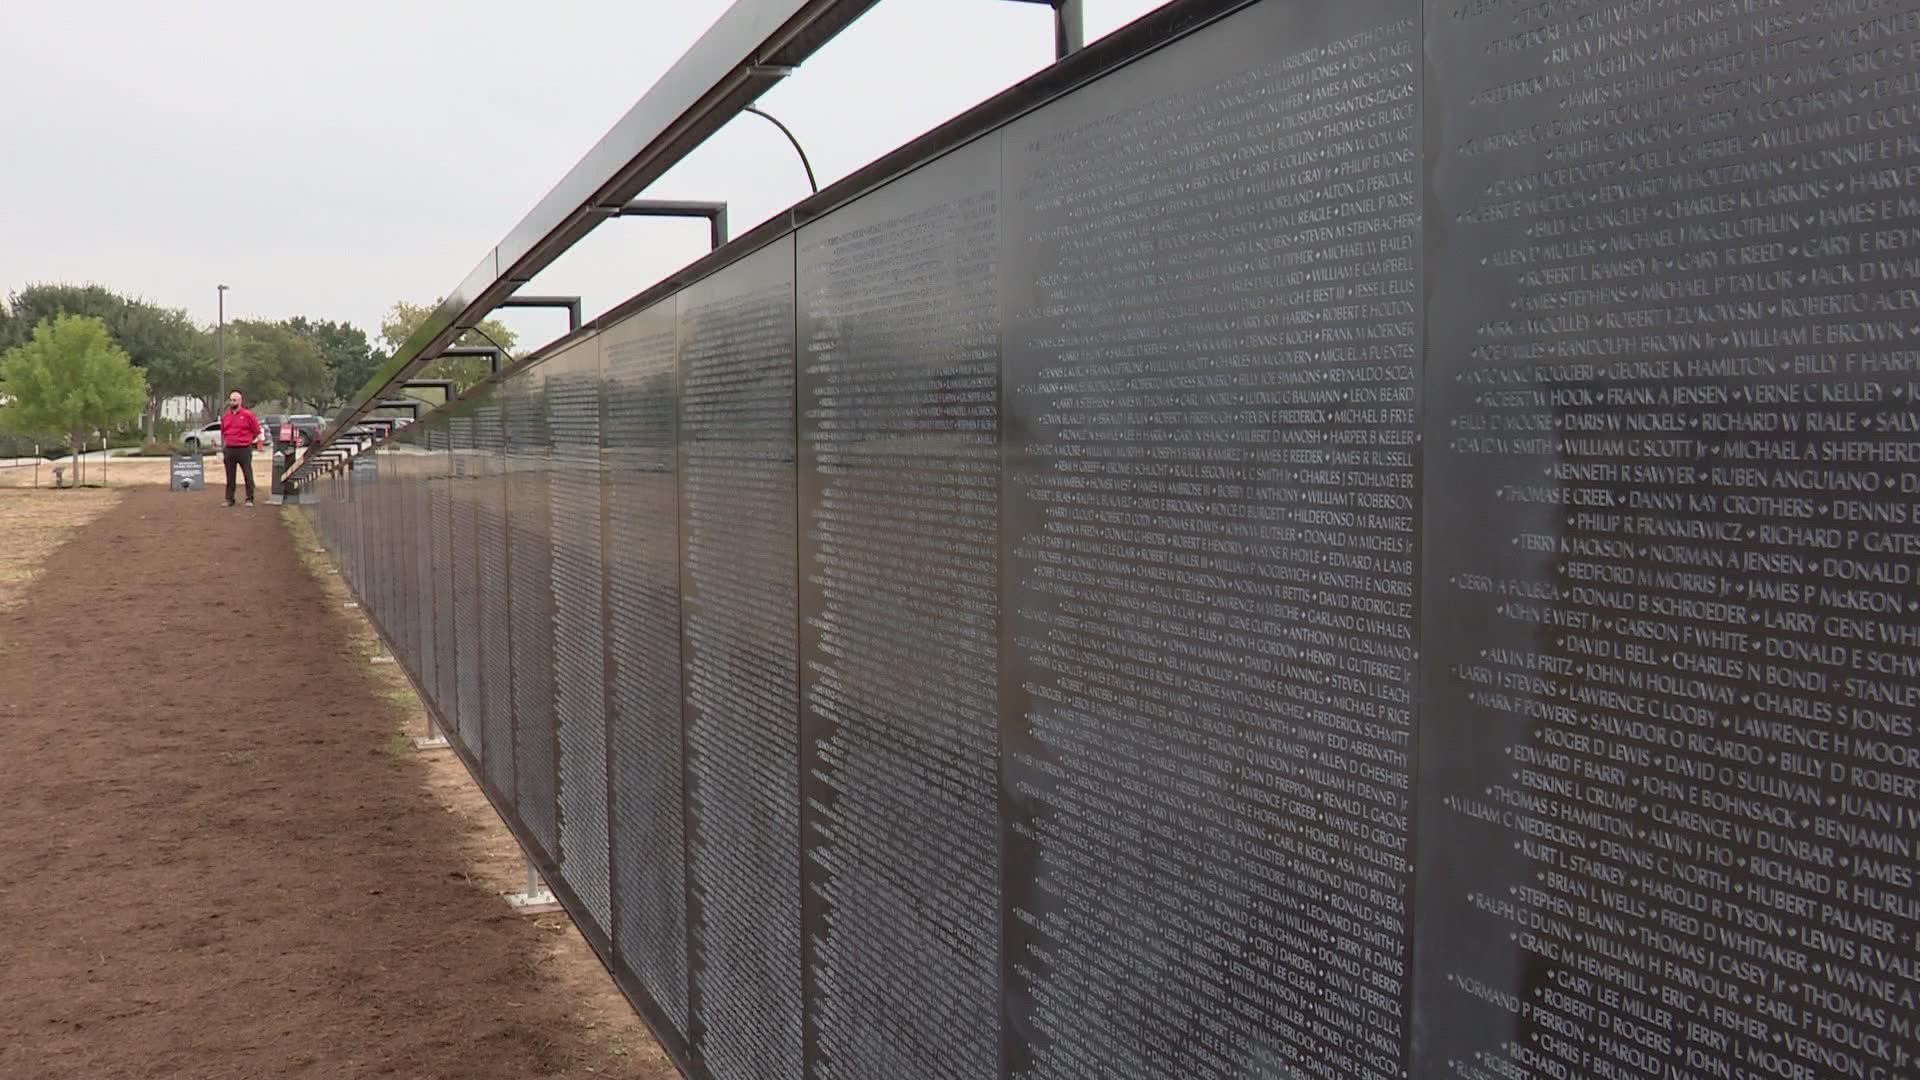 This morning a ceremony was held at Toyota Texas to celebrate the opening of 'The Wall That Heals'.